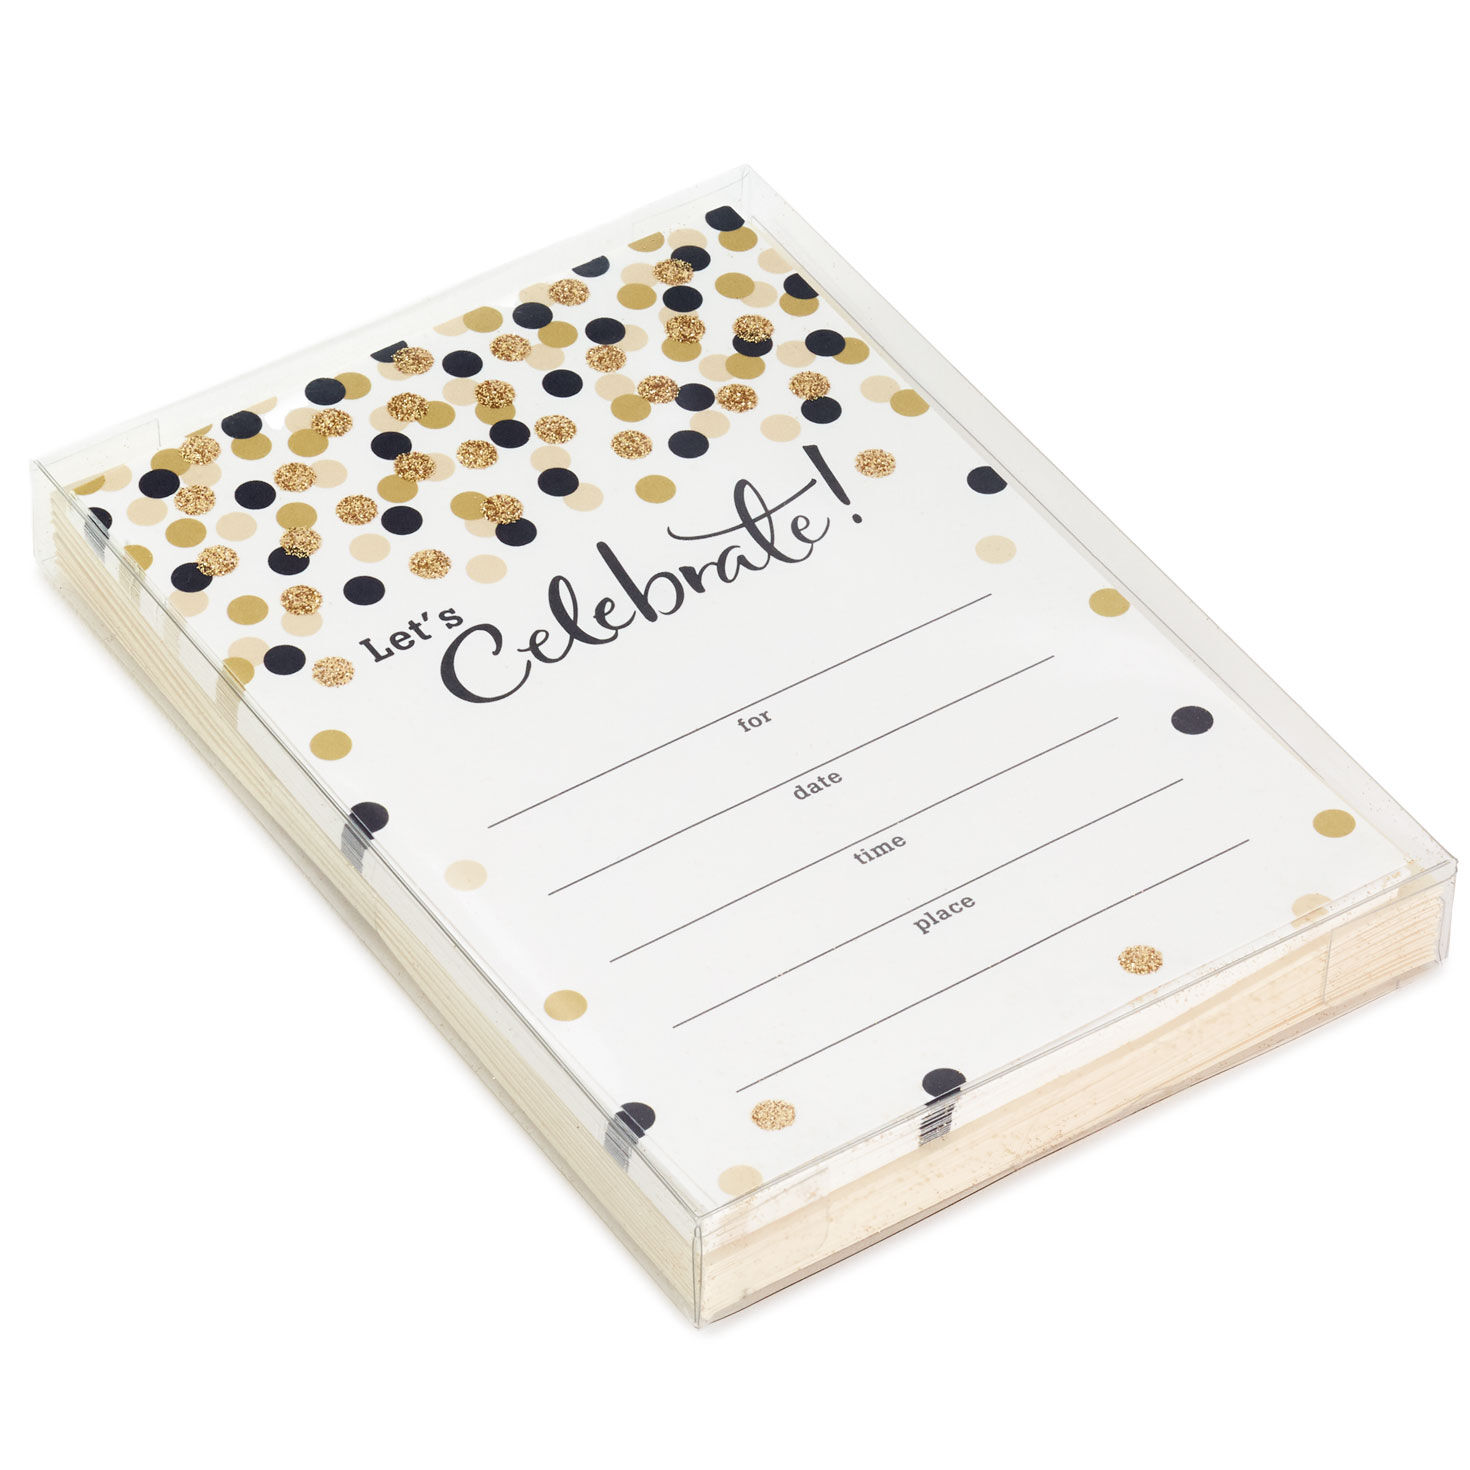 Let's Celebrate Gold Dots Party Invitations, Pack of 20 for only USD 7.99 | Hallmark